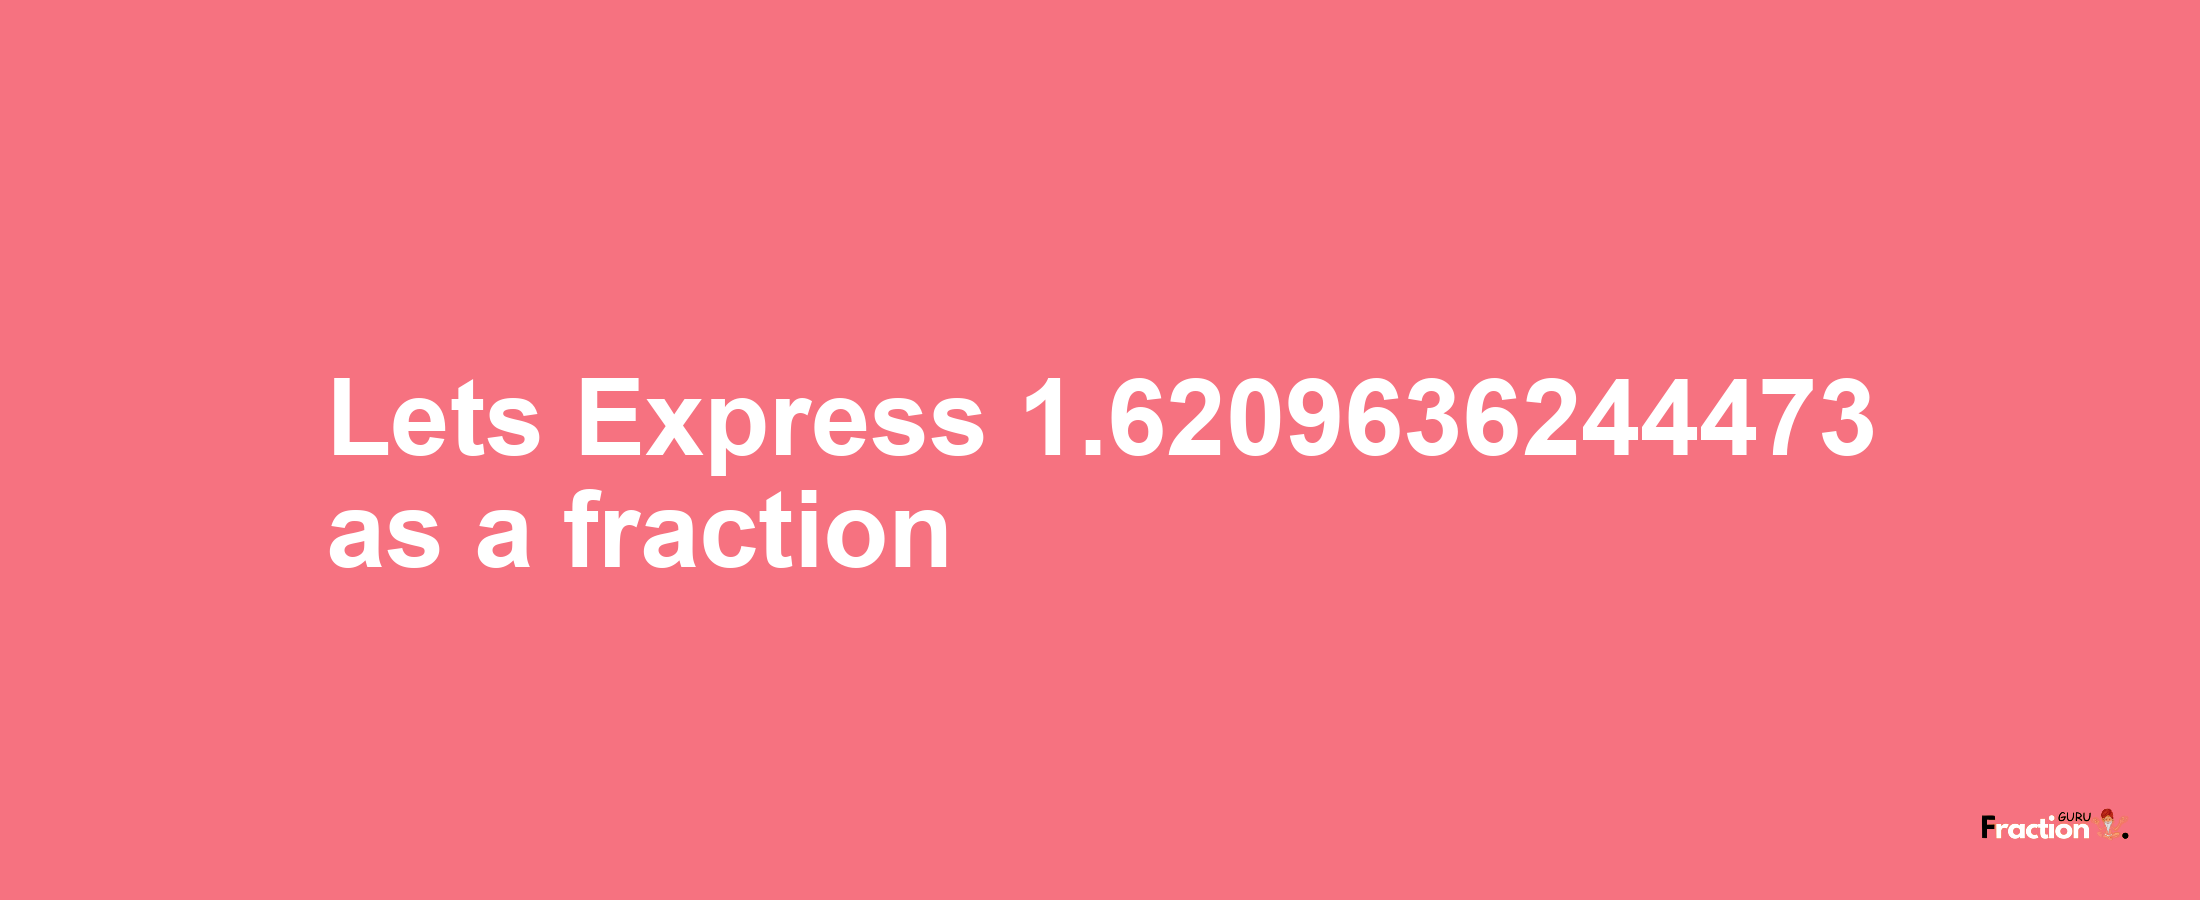 Lets Express 1.6209636244473 as afraction